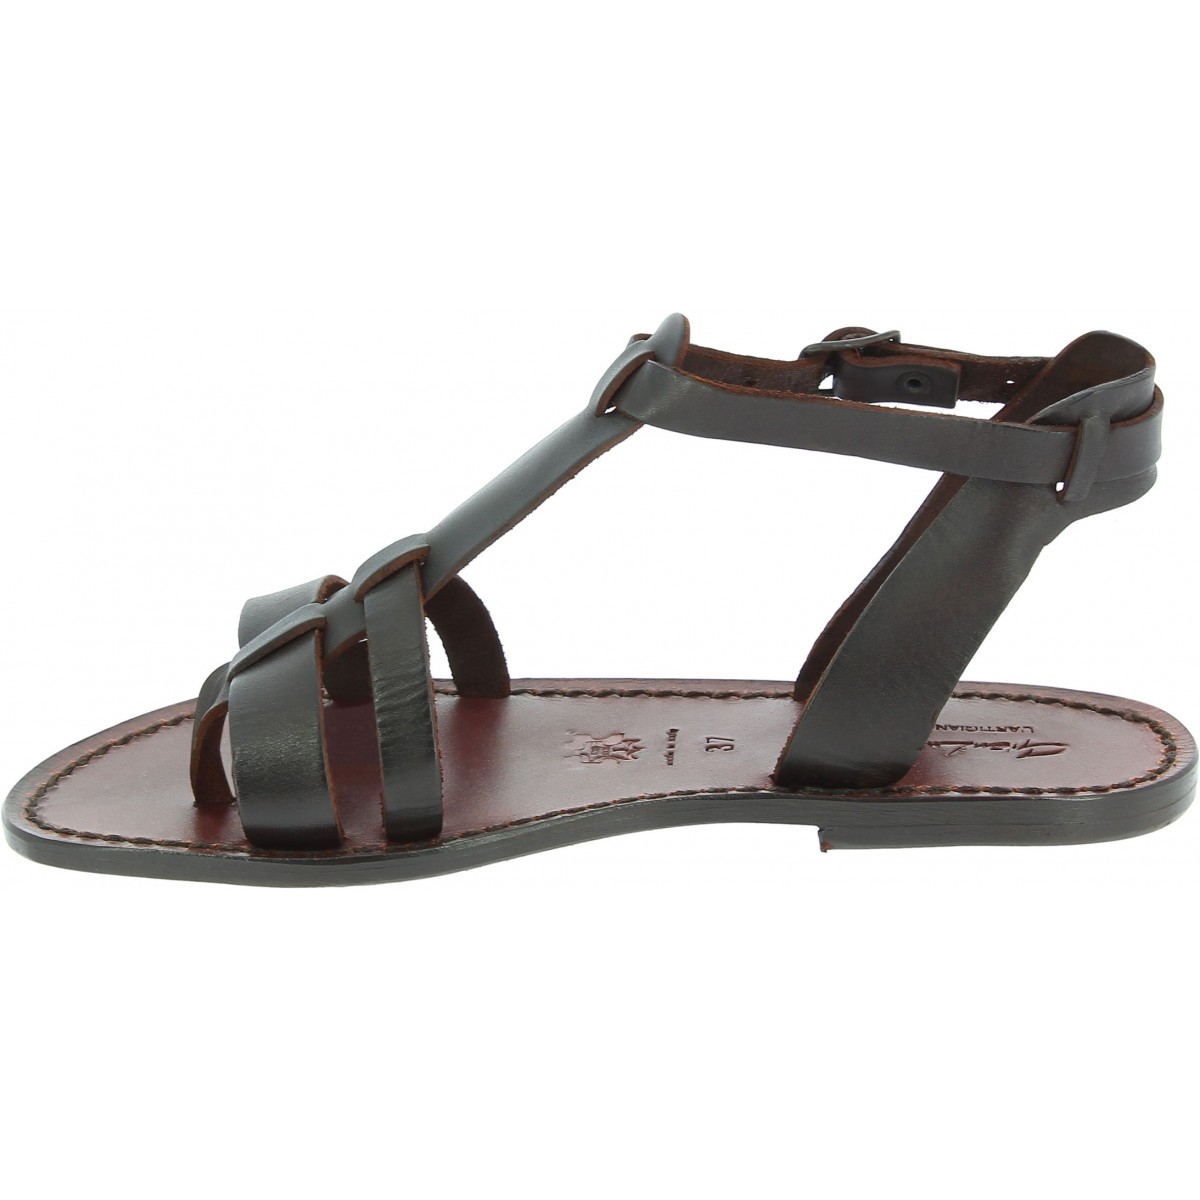 Women's leather flat brown sandals Handmade in Italy | The leather ...